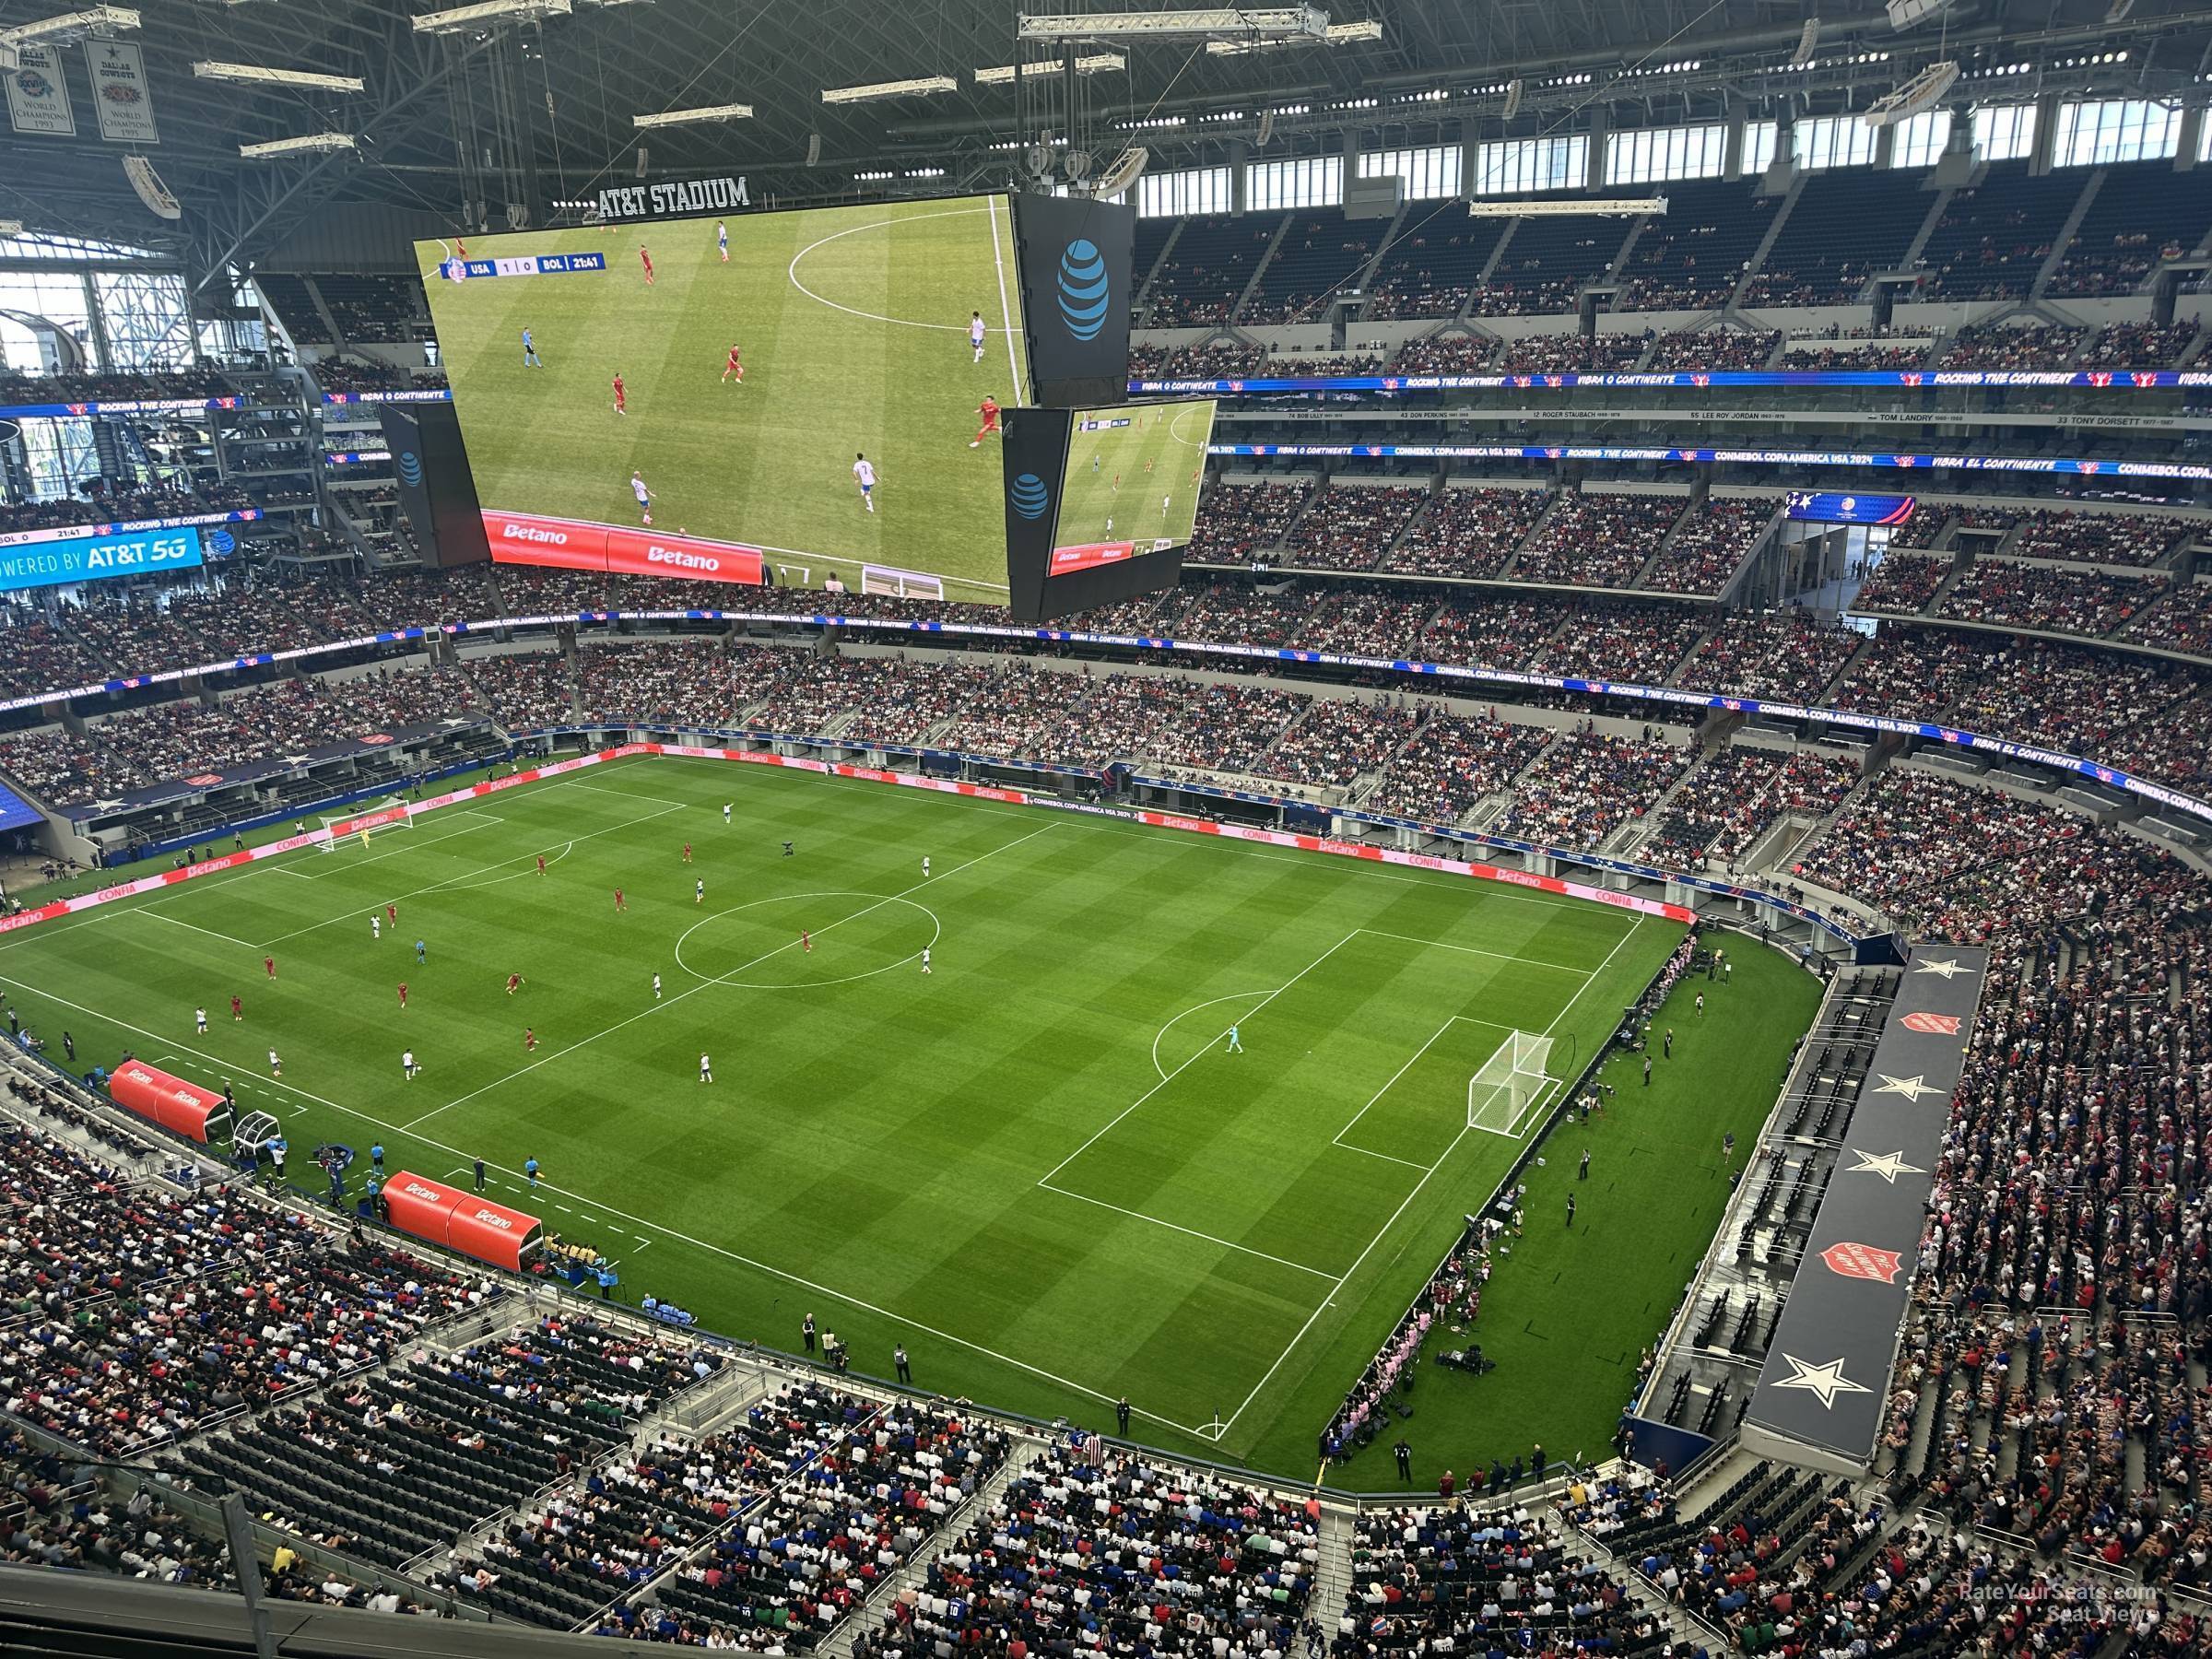 section 437, row 3 seat view  for soccer - at&t stadium (cowboys stadium)